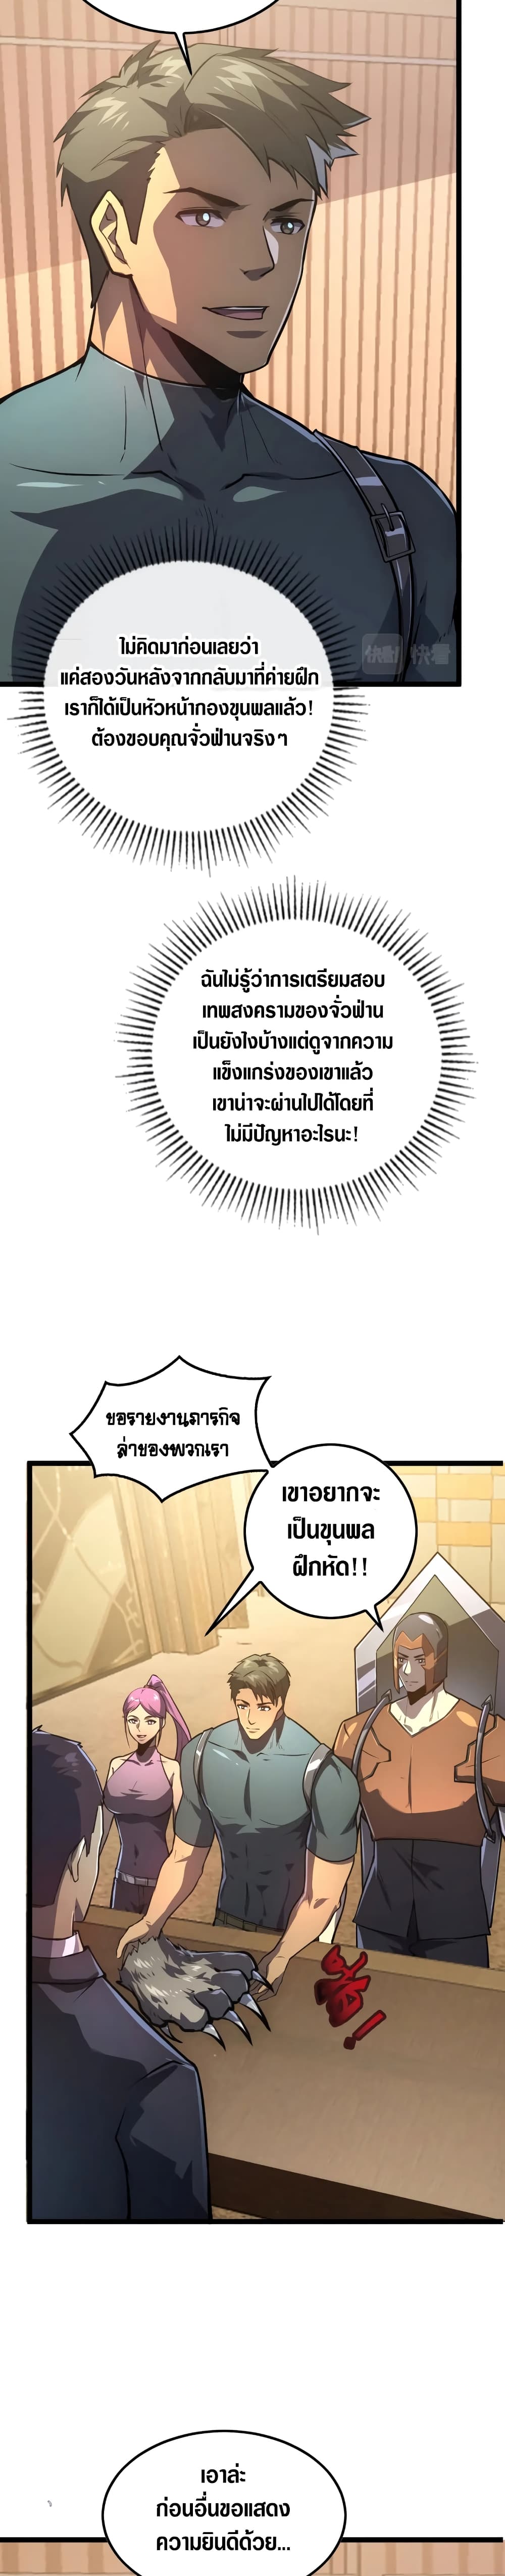 Rise From The Rubble เศษซากวันสิ้นโลก 140-140